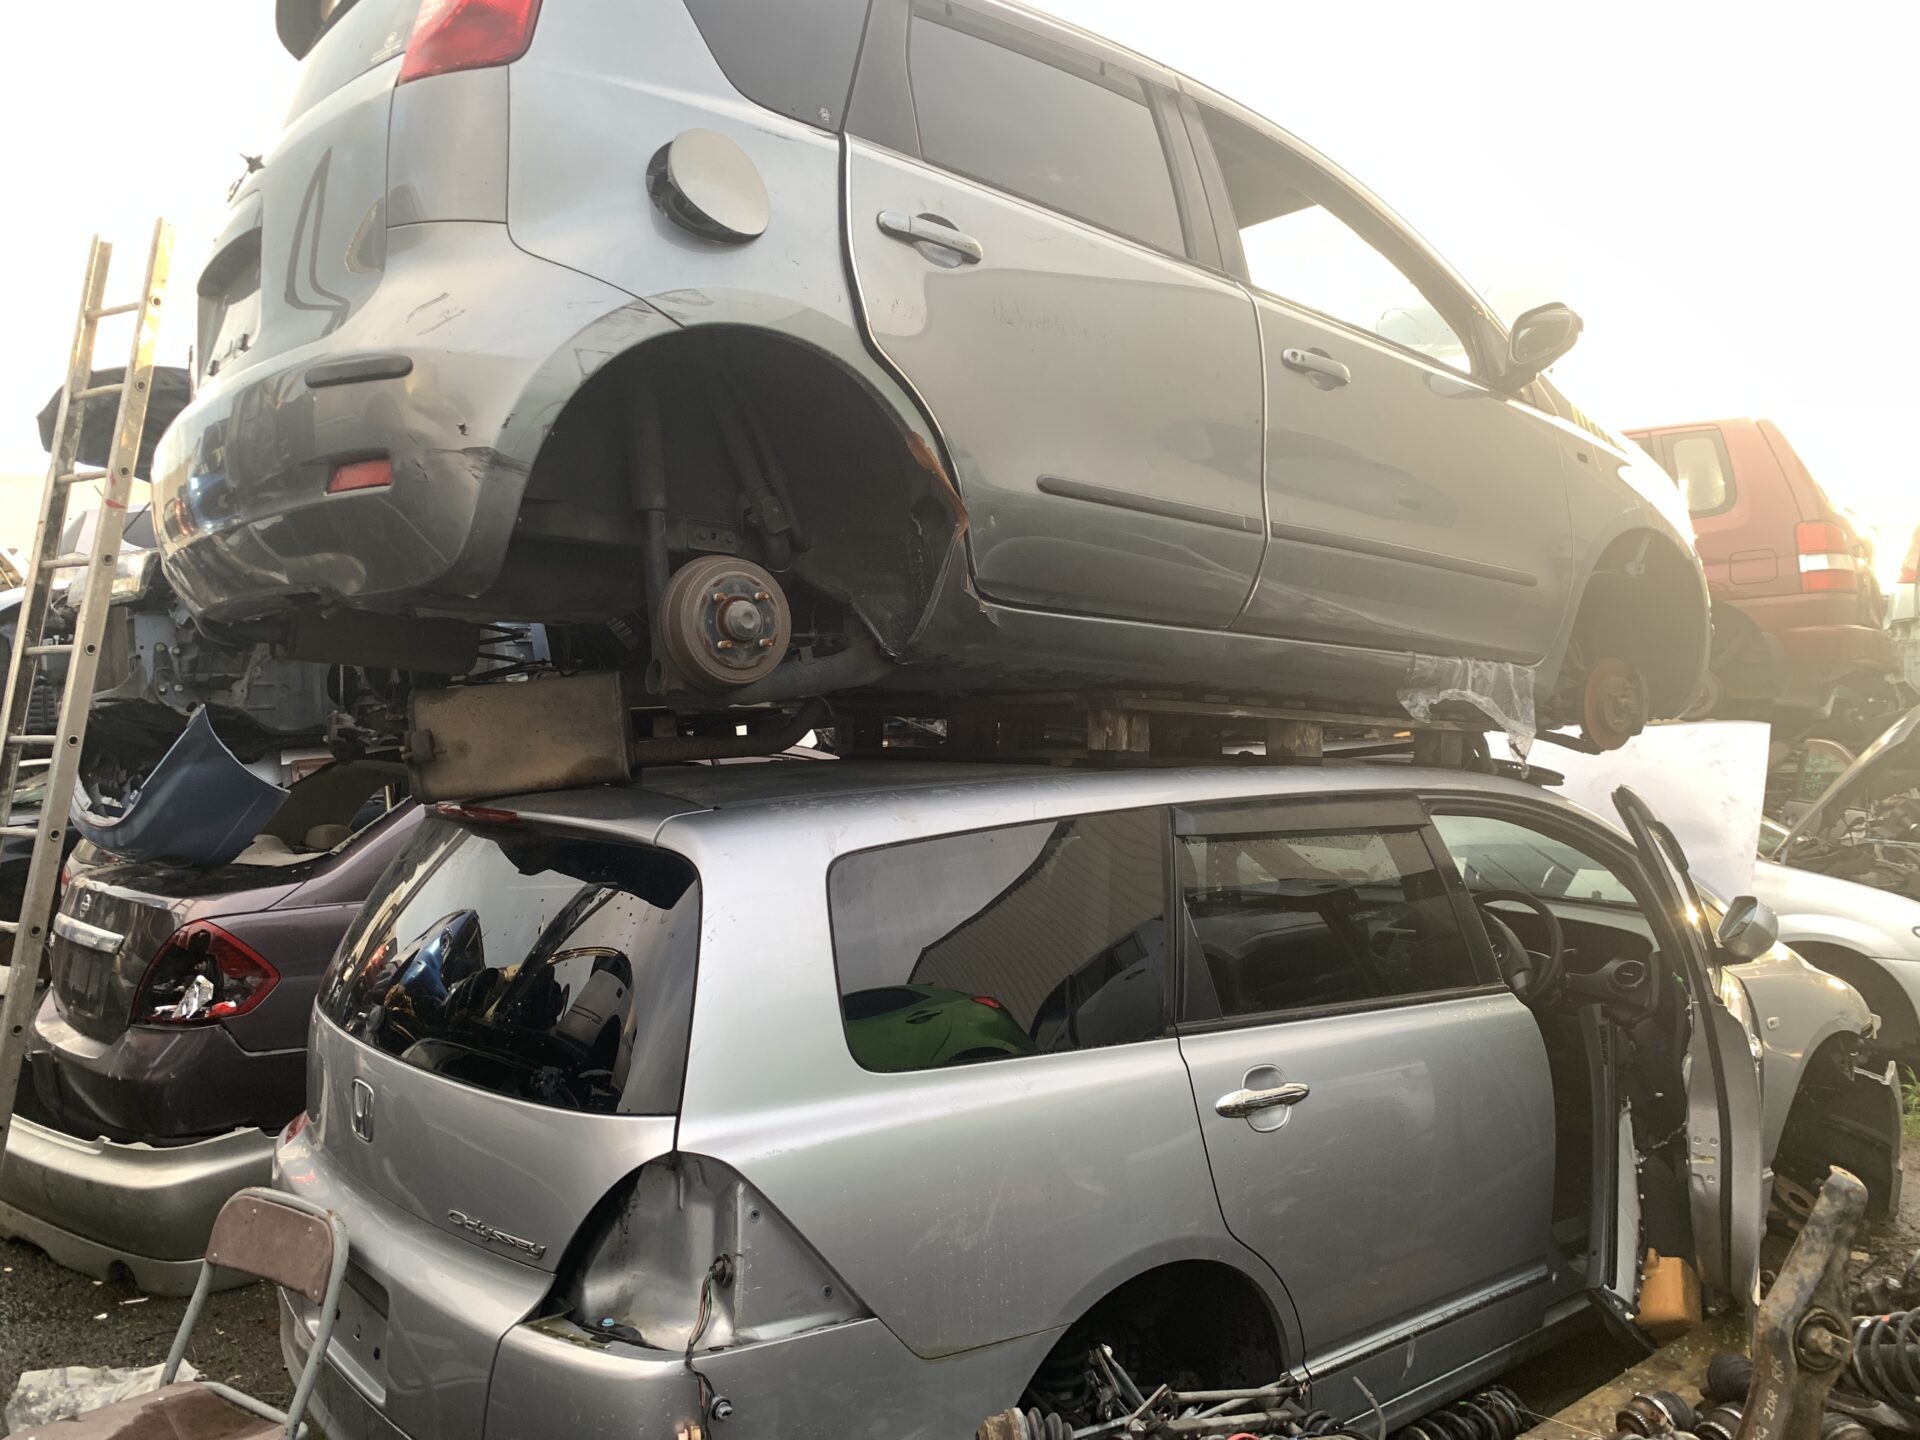 Car Wreckers Ngatea: Sell Vehicle, Used Parts & Dismantlers